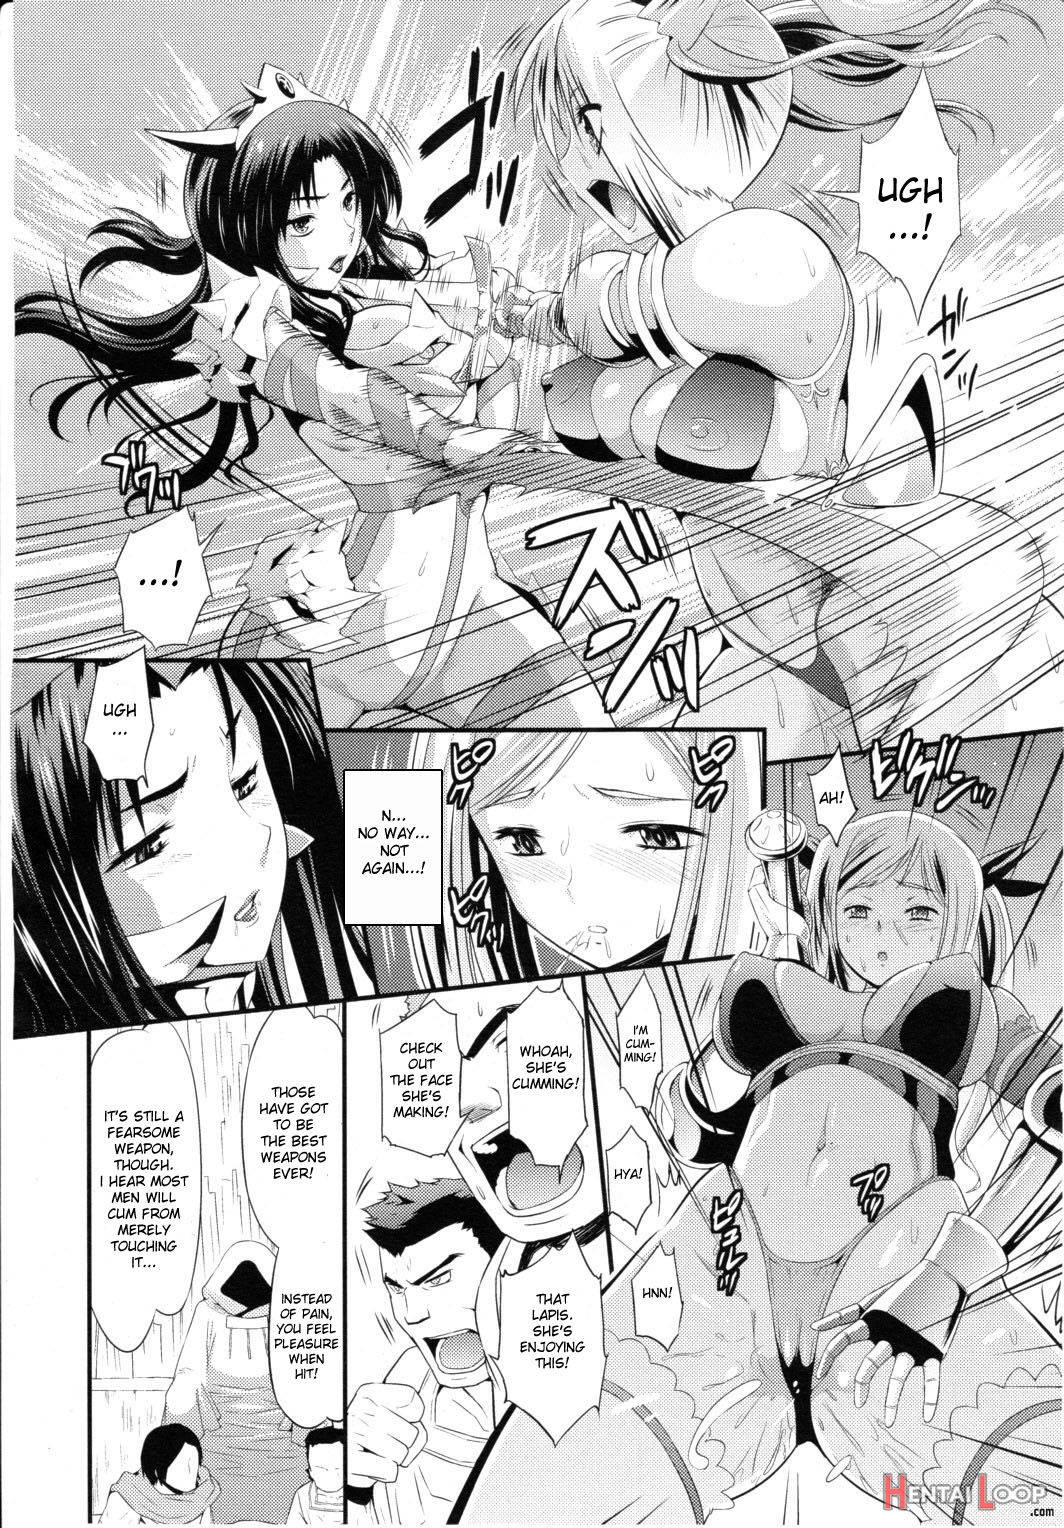 Lusty Blade page 2